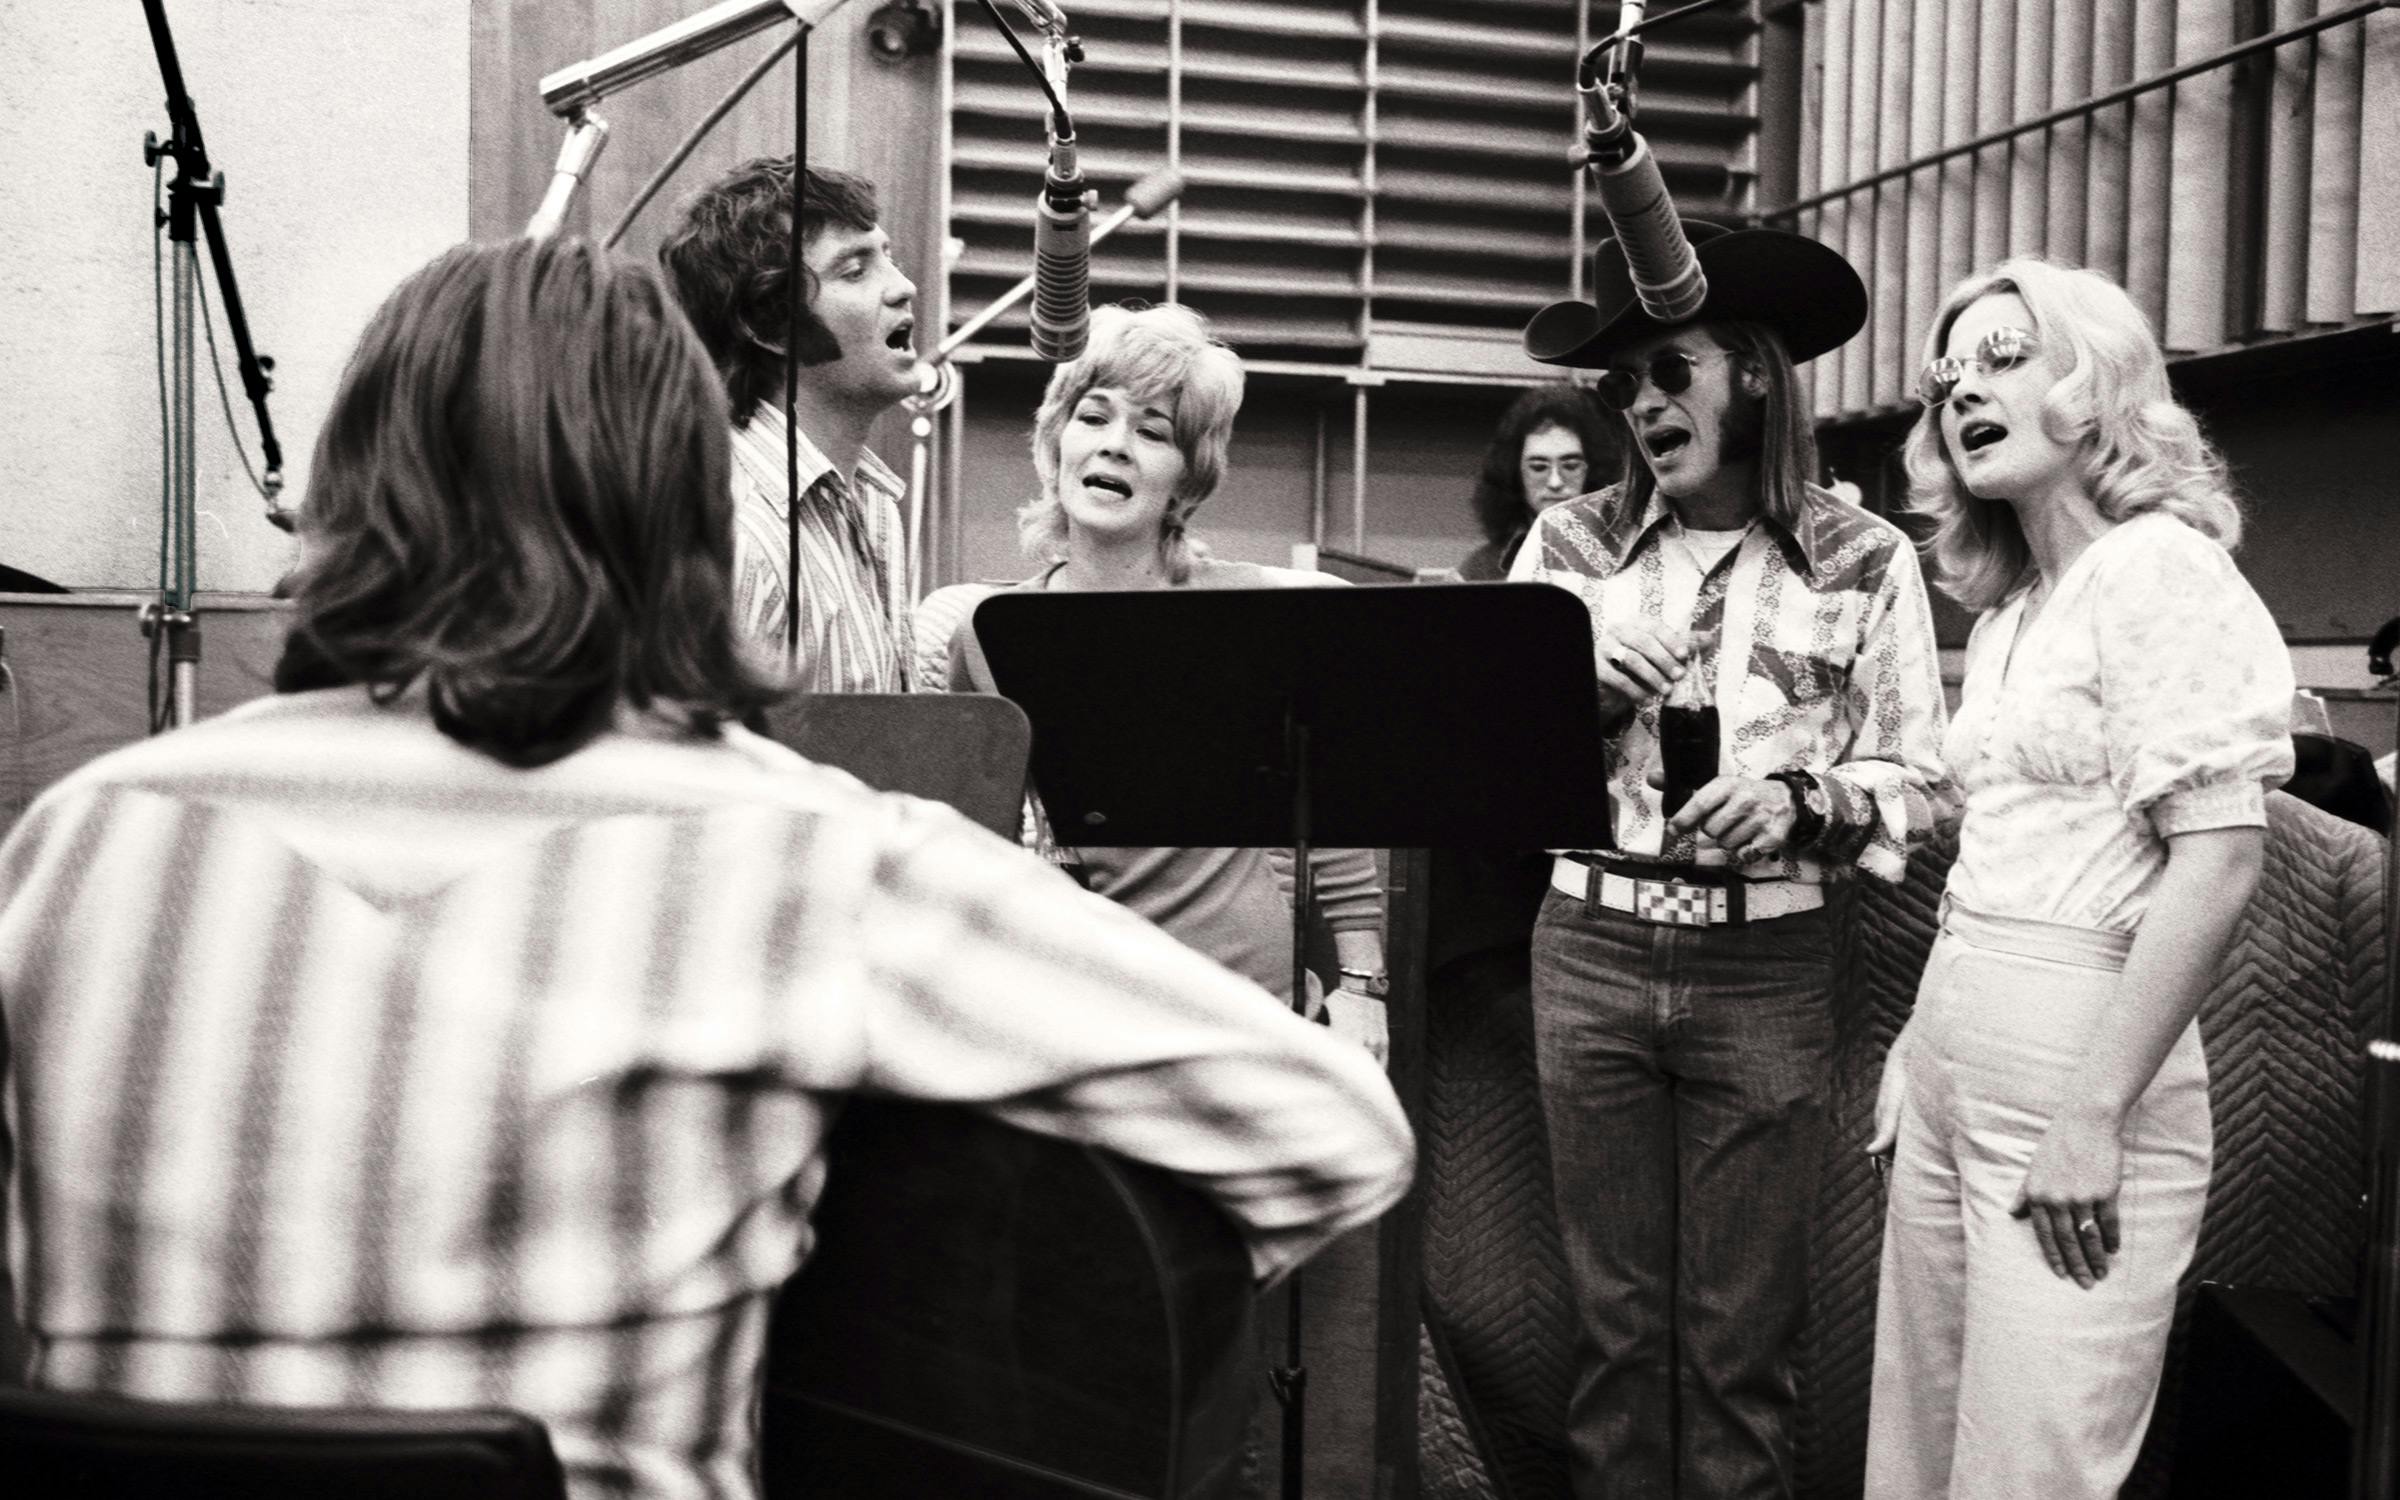 Willie in a recording session with backing vocalists Larry Gatlin, Sammi Smith, Doug Sahm, and Dee Moeller in New York City in February 1973.